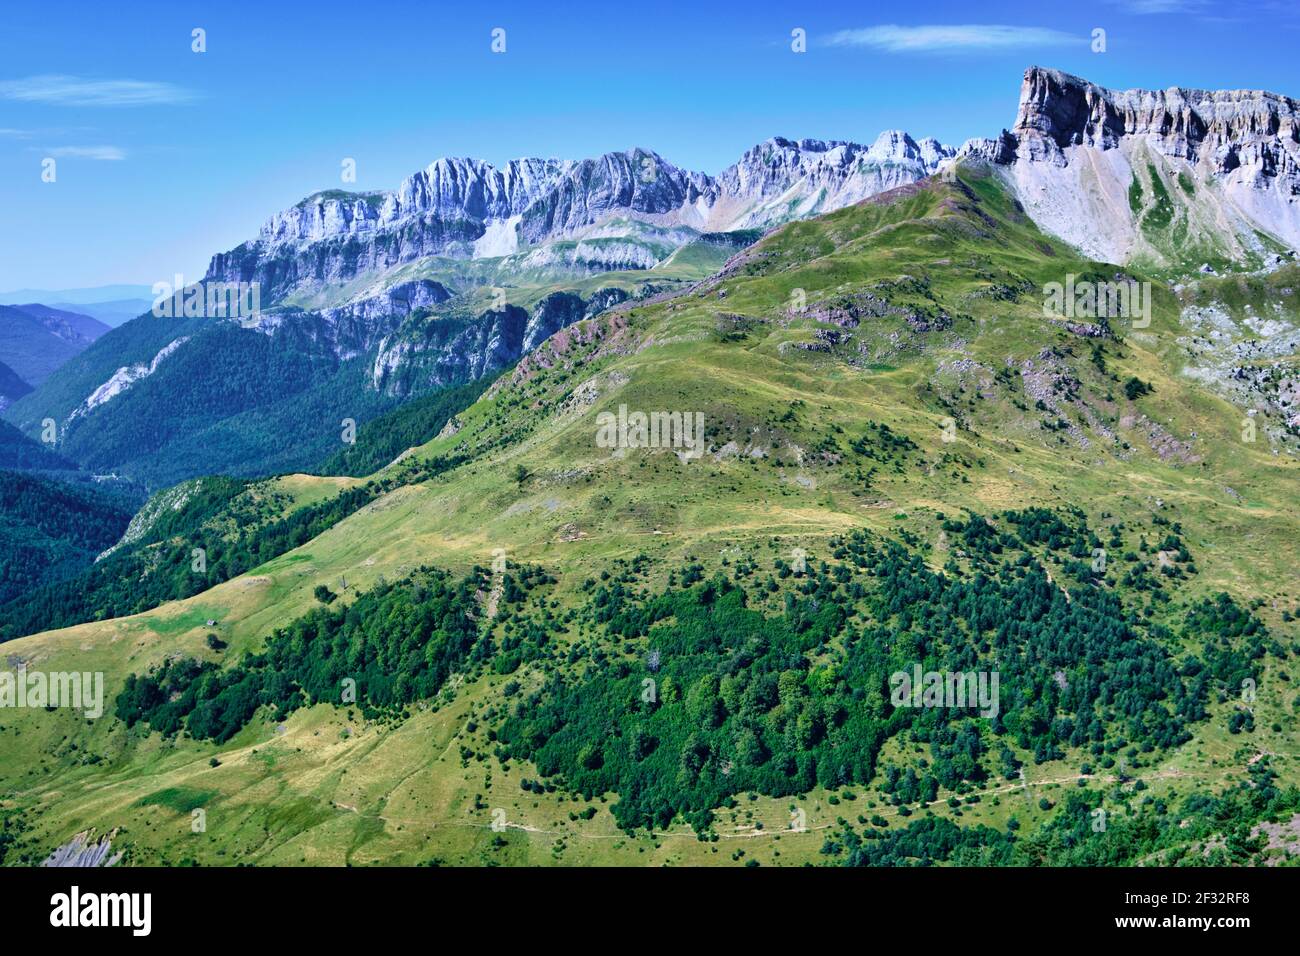 Mountains and grasslands landscape view. Stock Photo